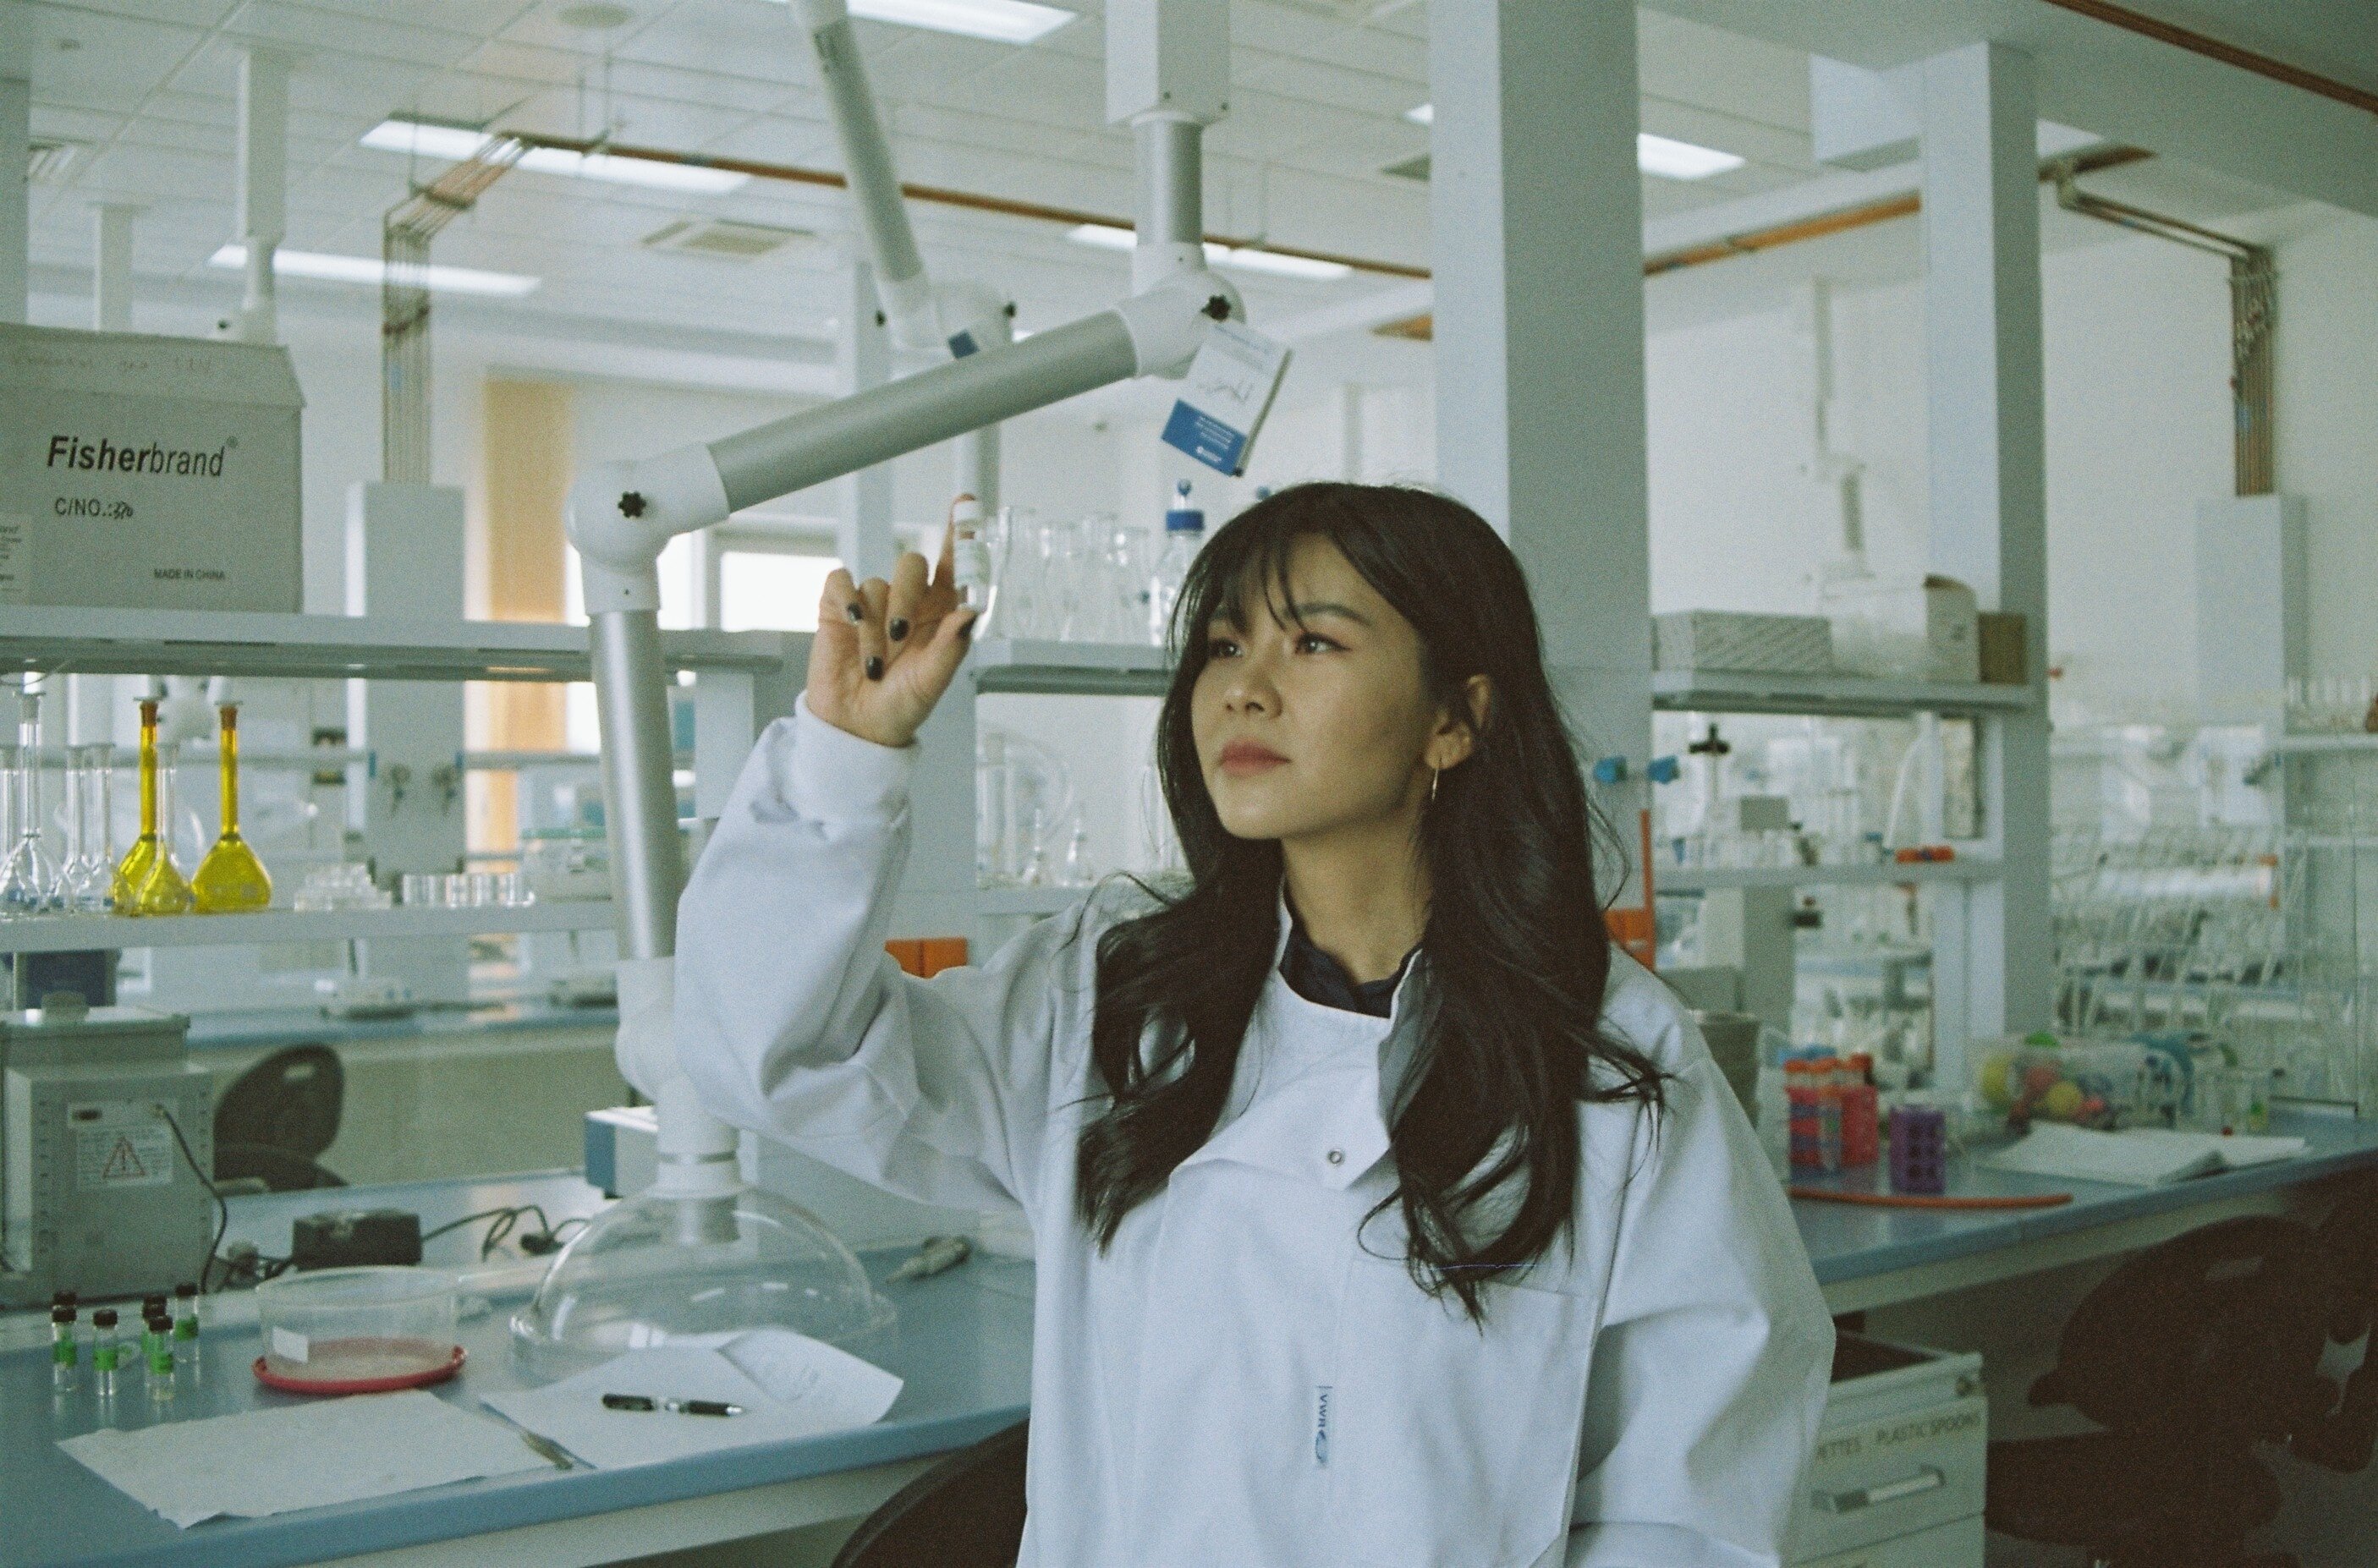 Let's Get Started Did You Bring My Lab Coat? - Chemistry Cat